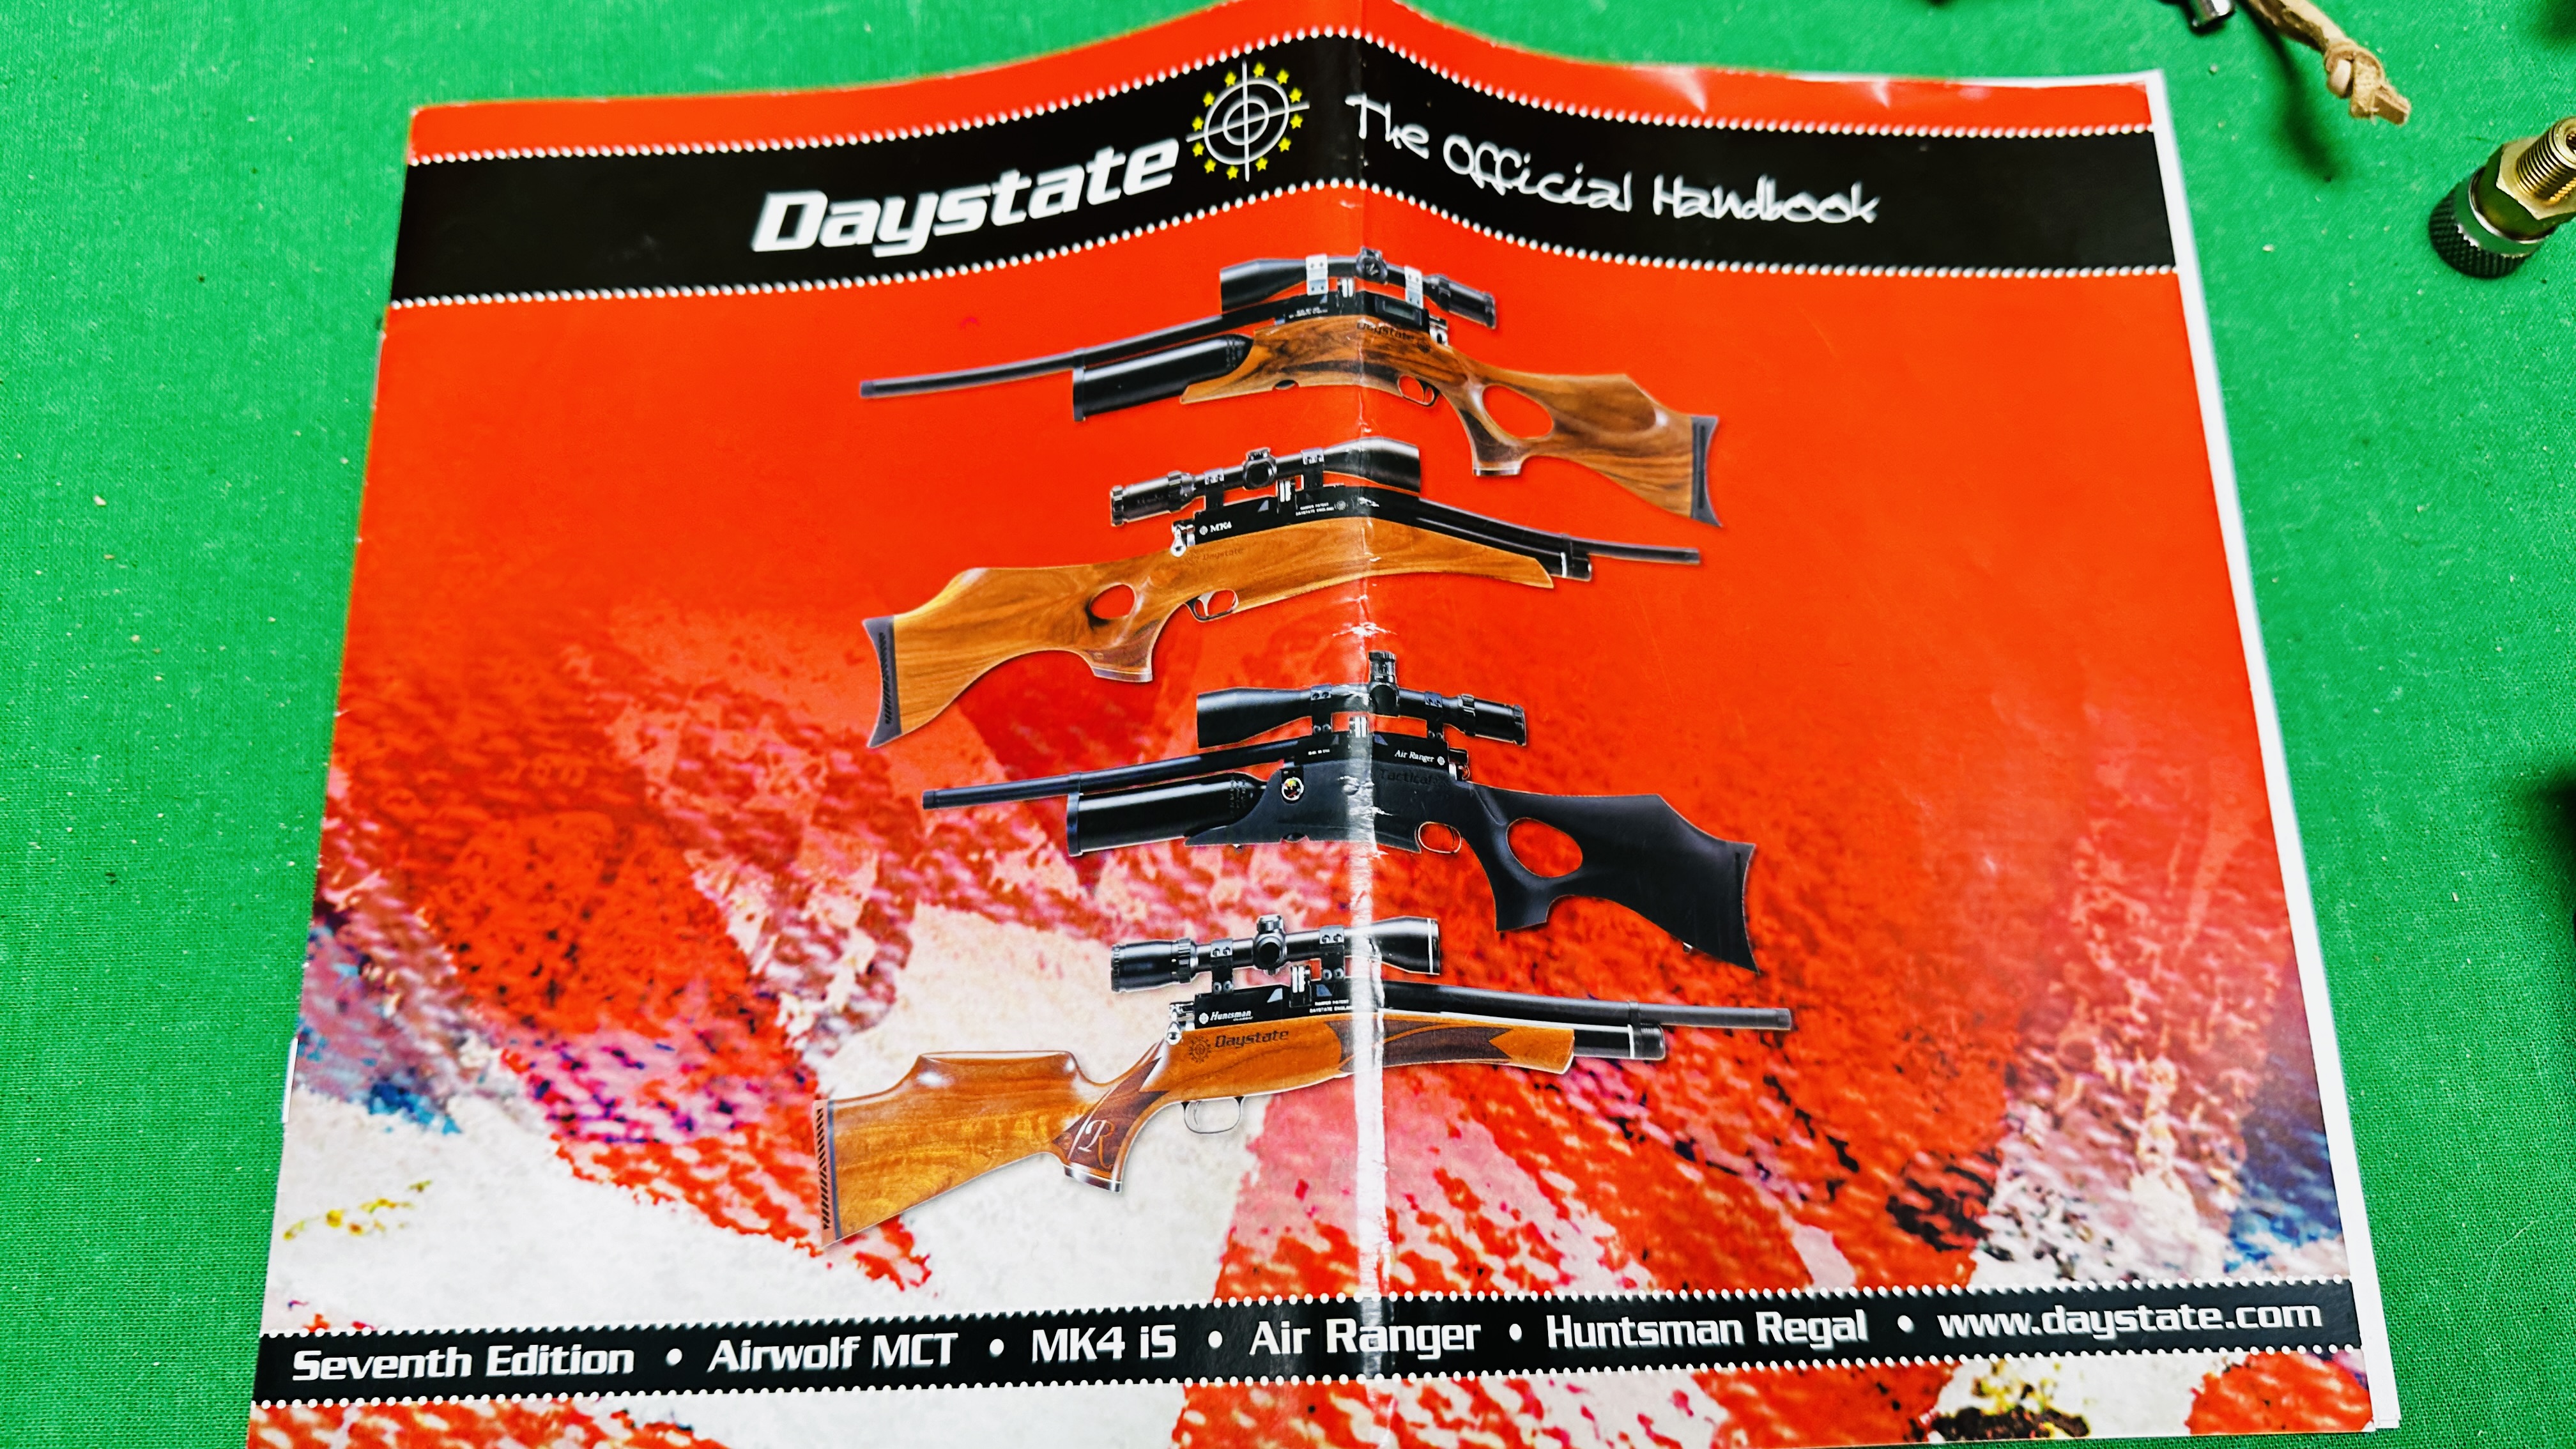 DAYSTATE AIRWOLF MCT DIGITAL PCP MULTI SHOT AIR RIFLE COMPLETE WITH 4 10 SHOT MAGAZINES, - Image 24 of 25